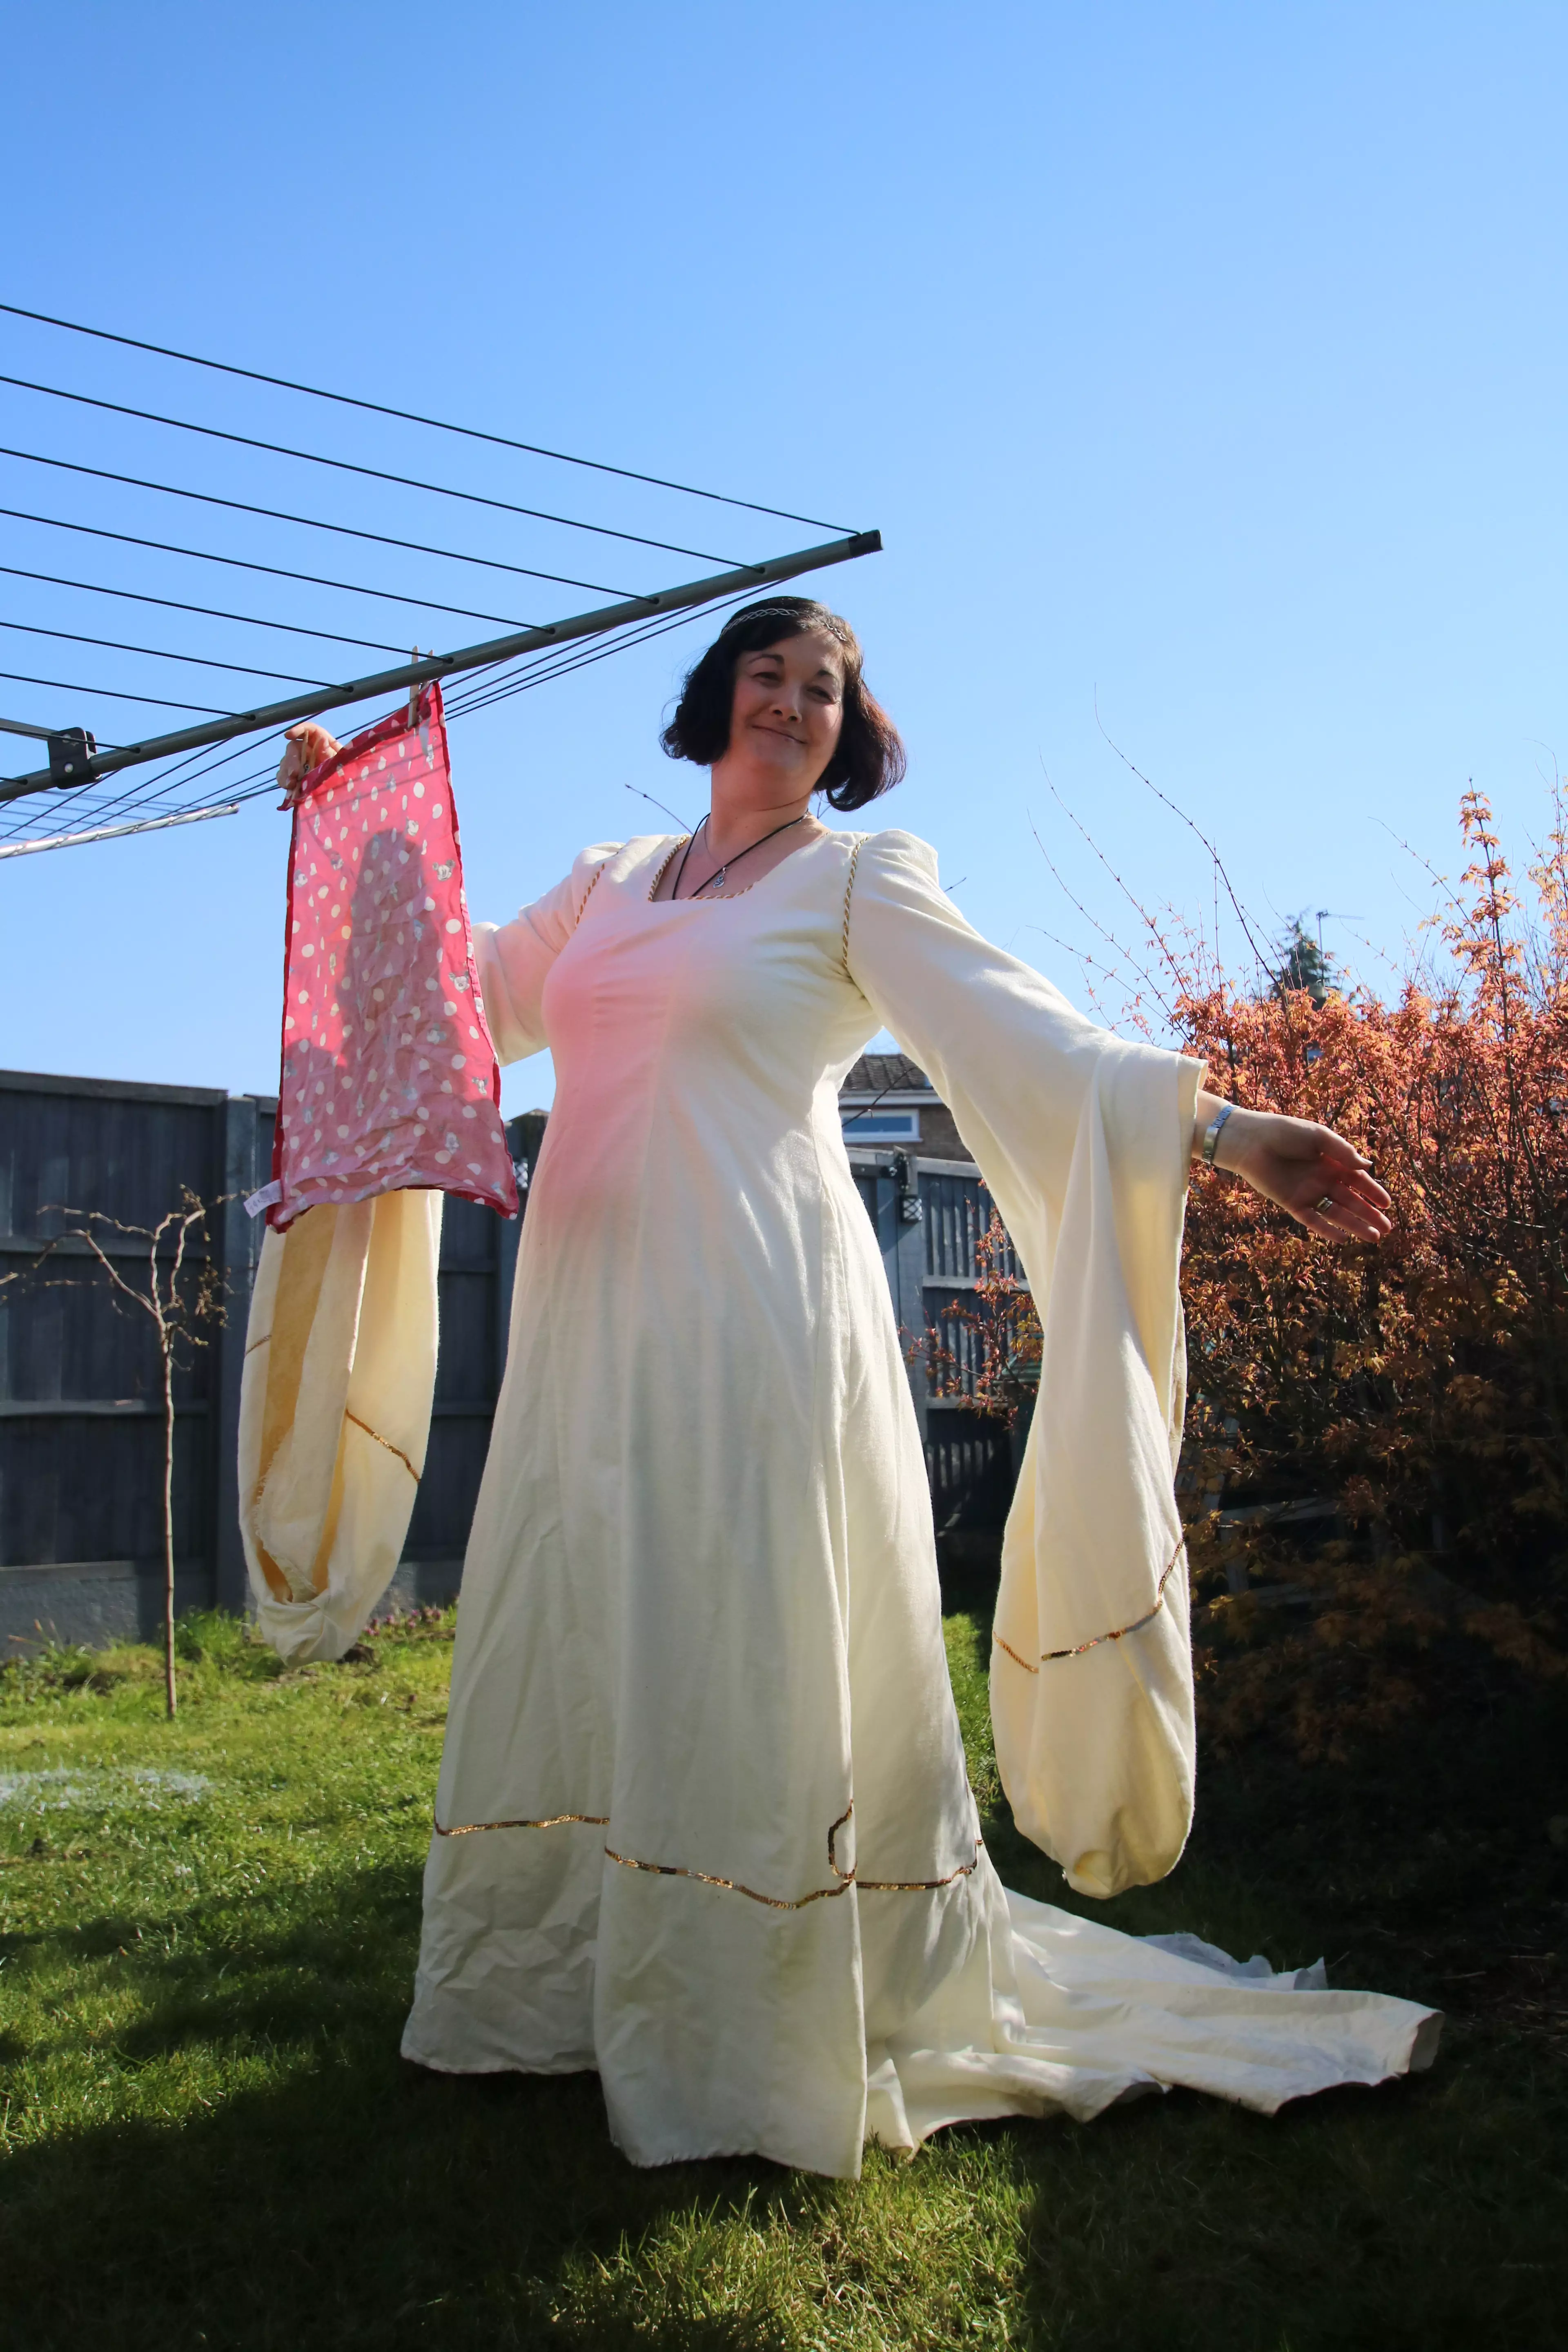 One woman wore a Medieval-style gown to hang out her laundry (